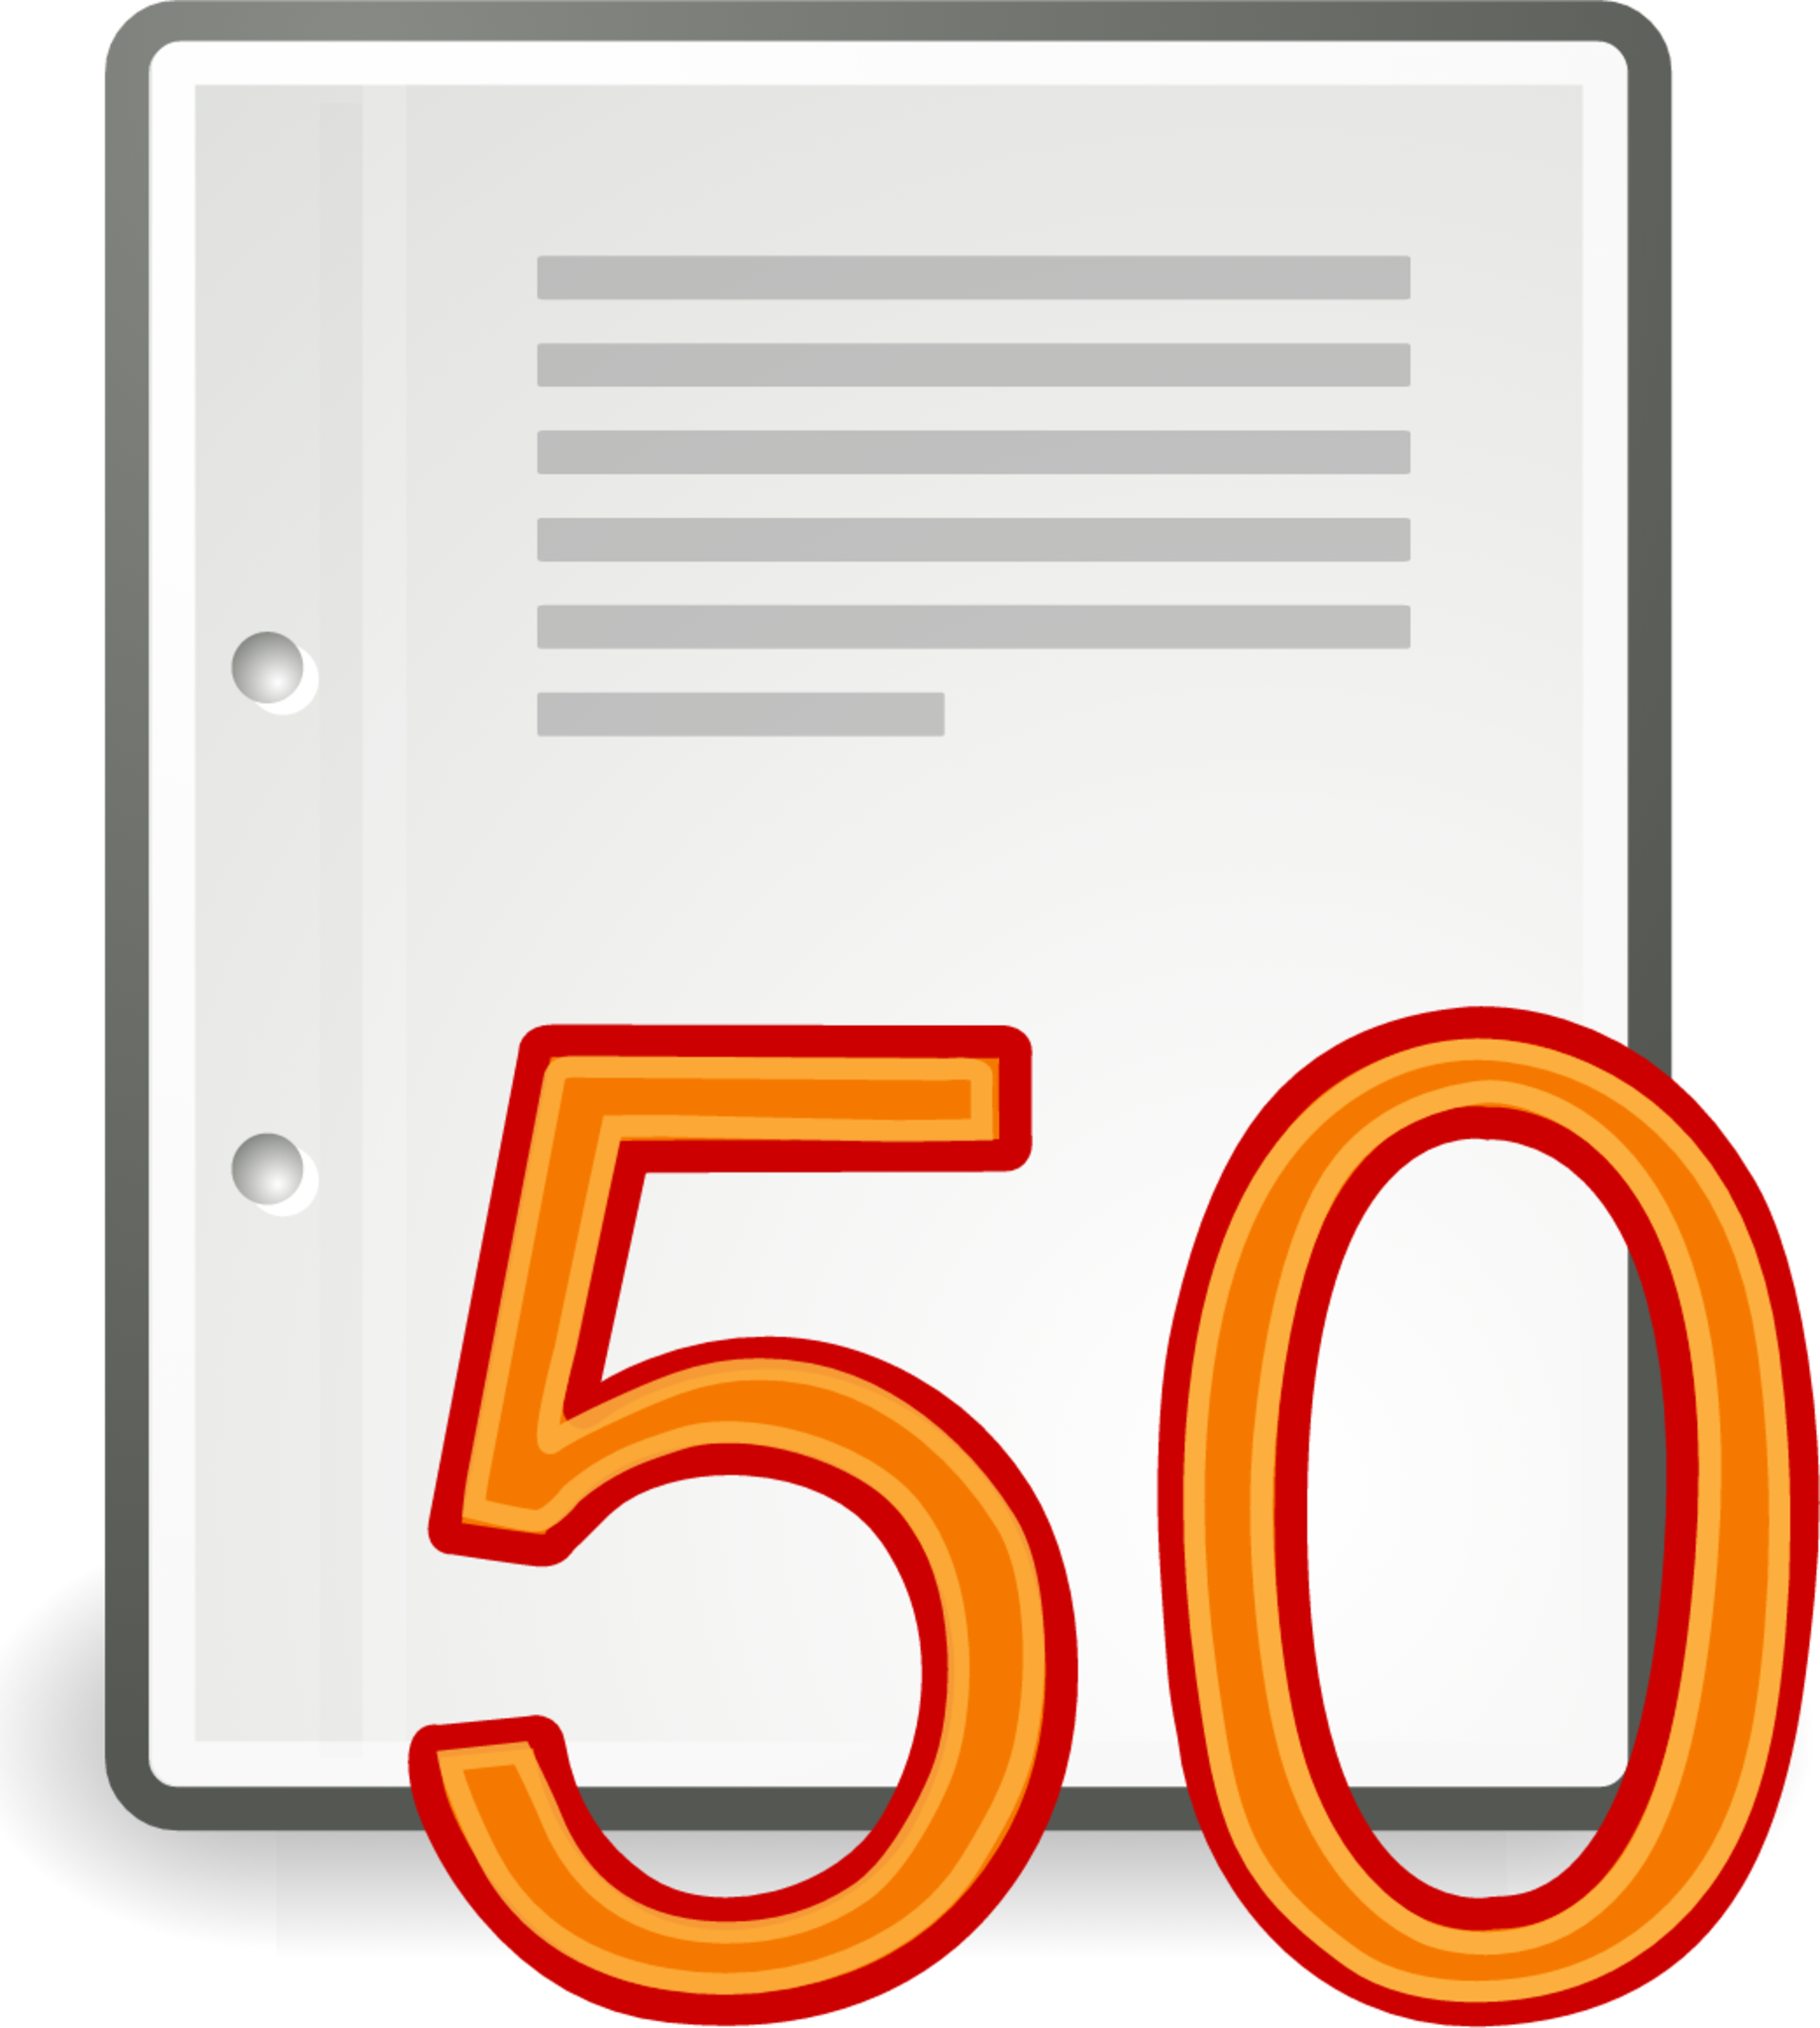 fifty per page icon